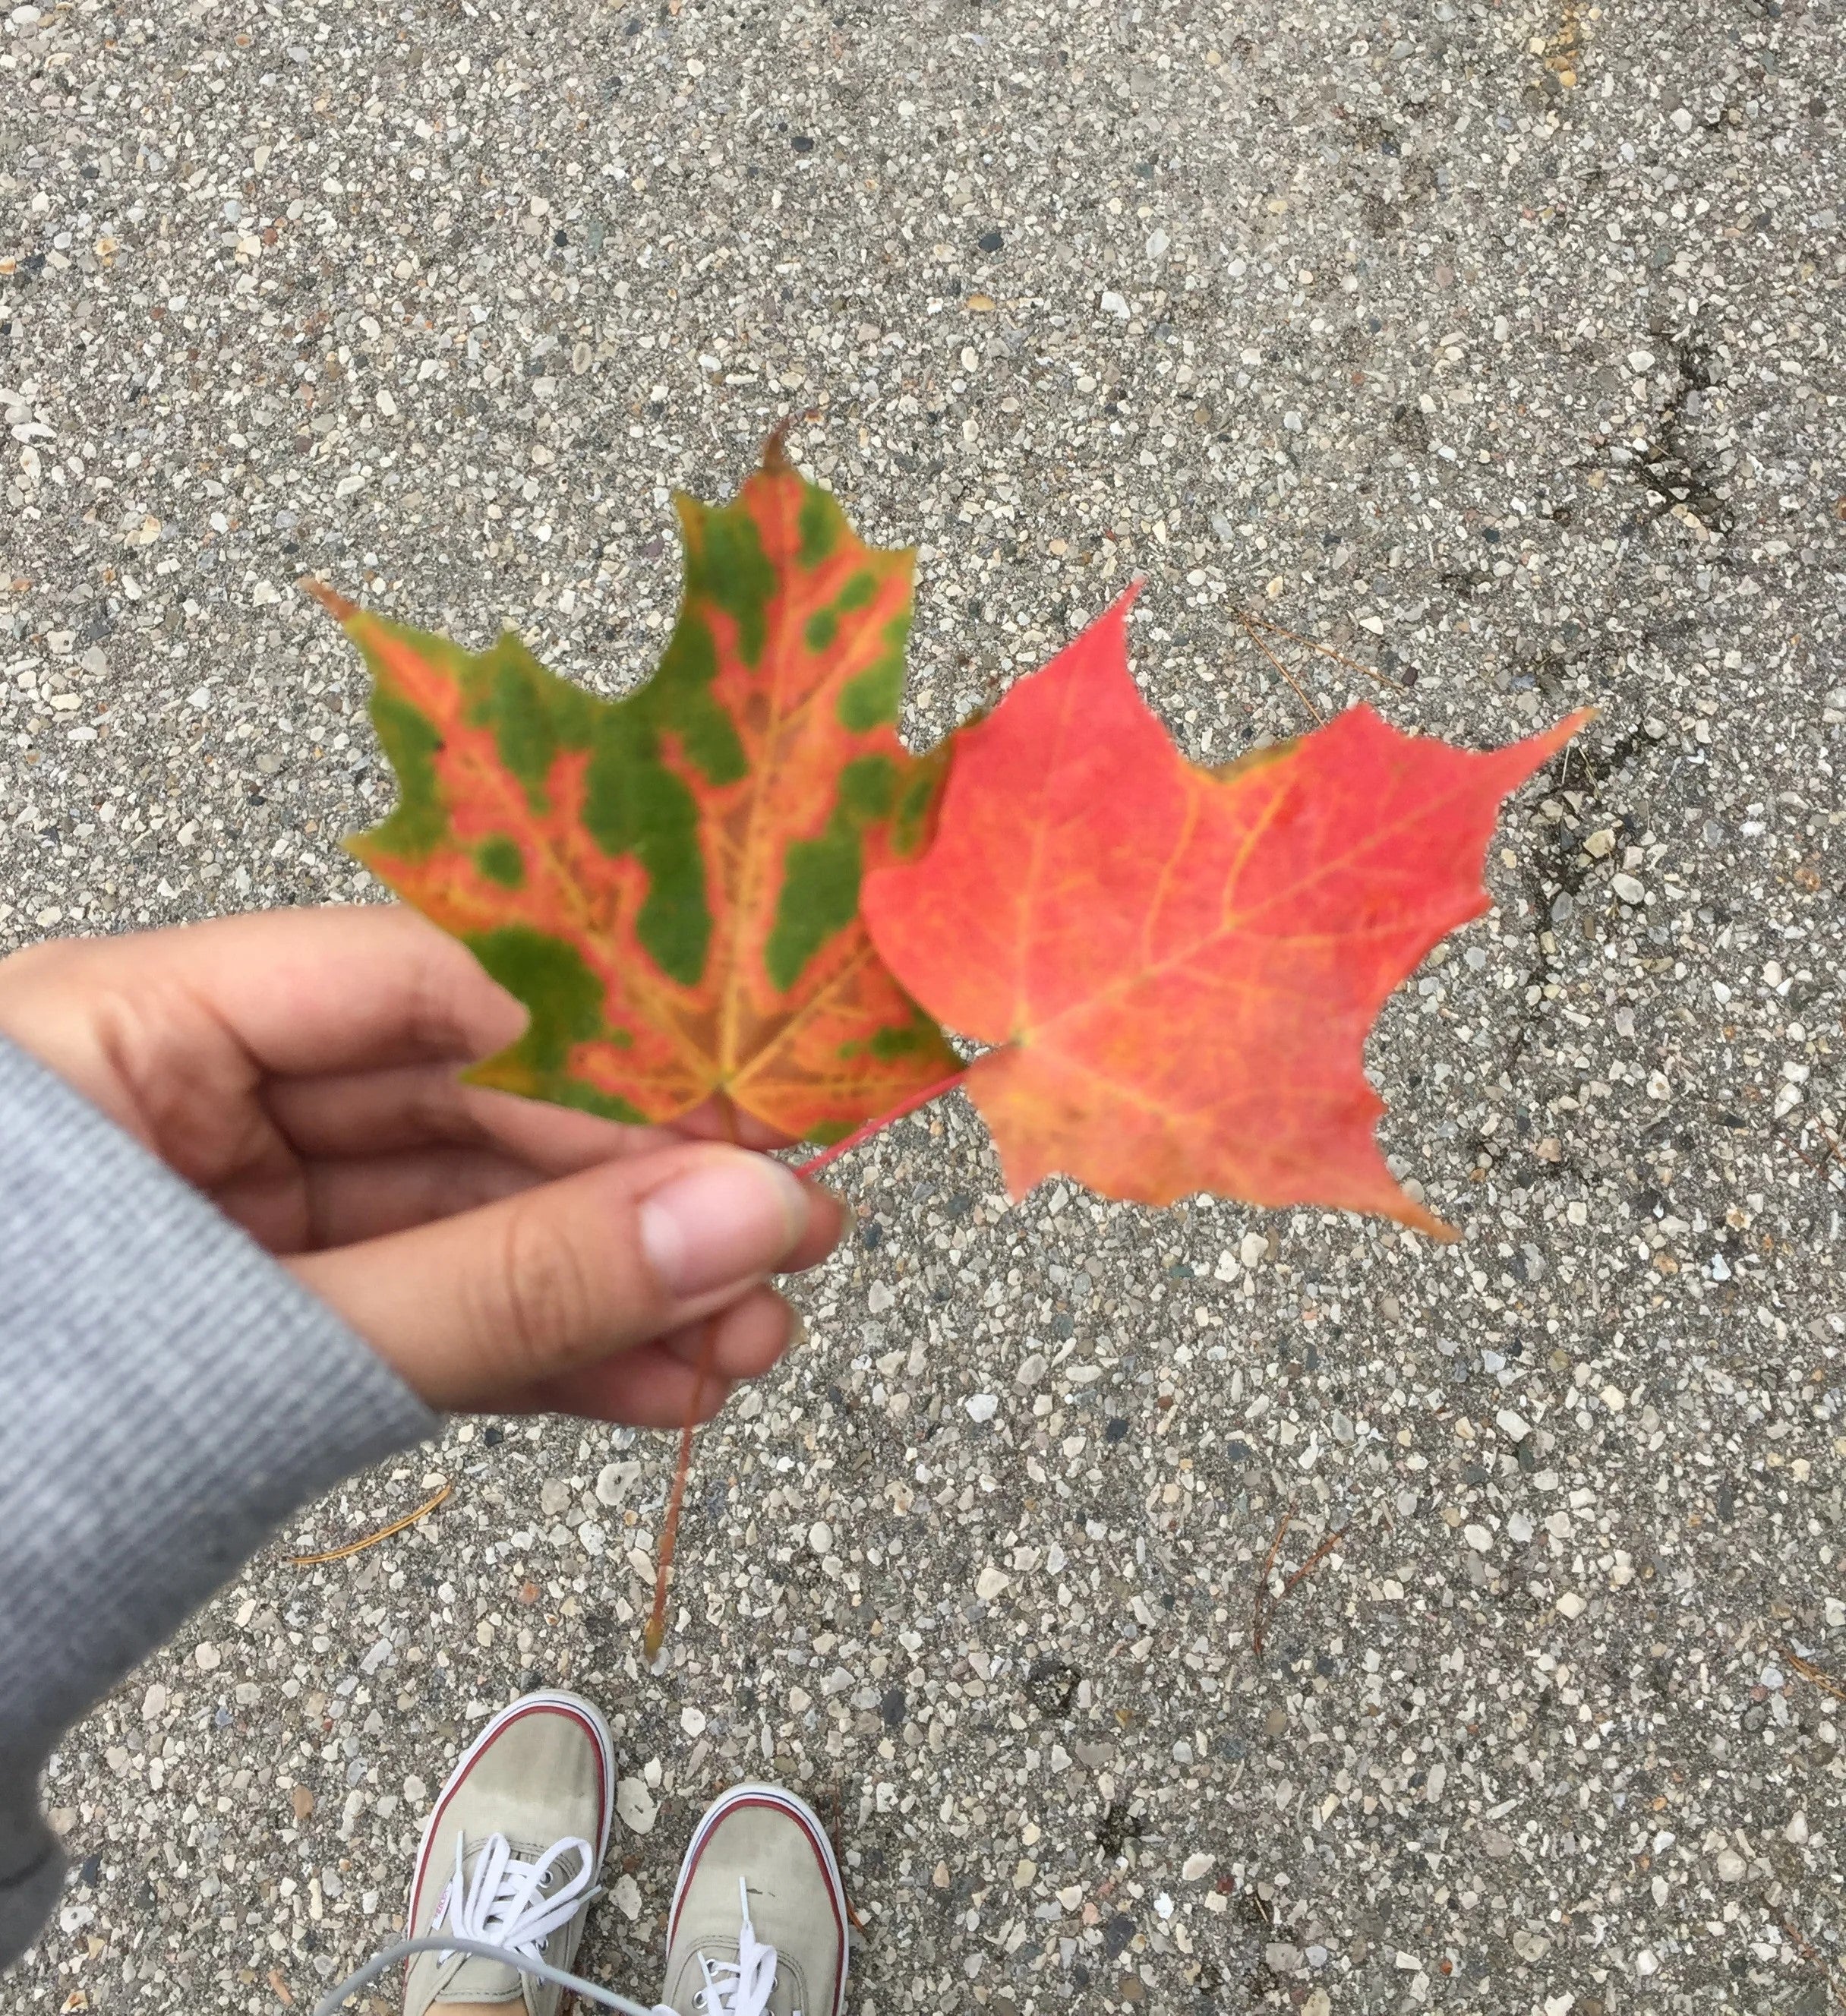 Chriz holding two colourful maple leaves.